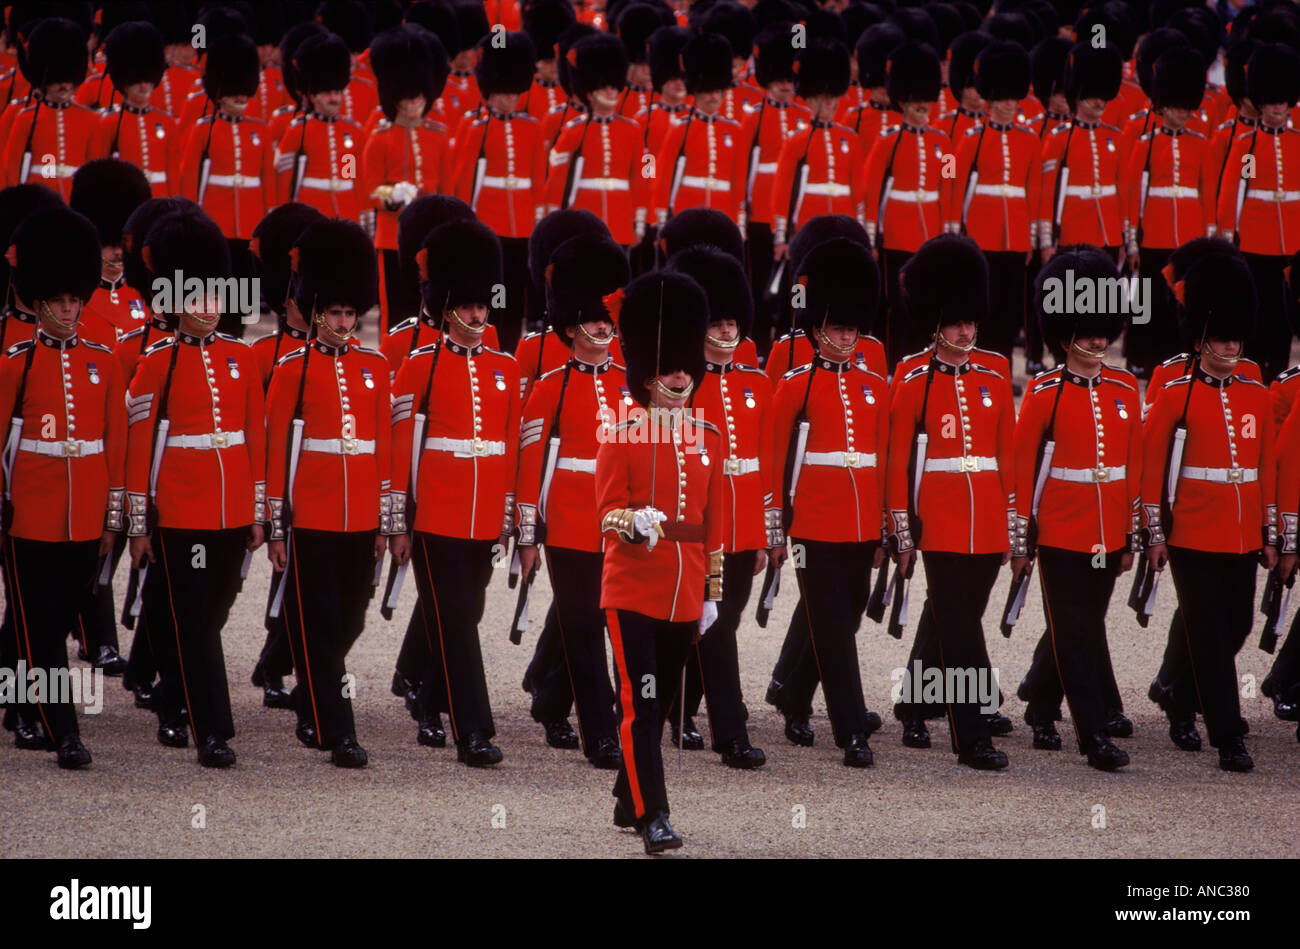 Trooping the Colour on Horse Guards Parade. British soldiers in ceremonial uniform London Uk circa June 1985. HOMER SYKES Stock Photo